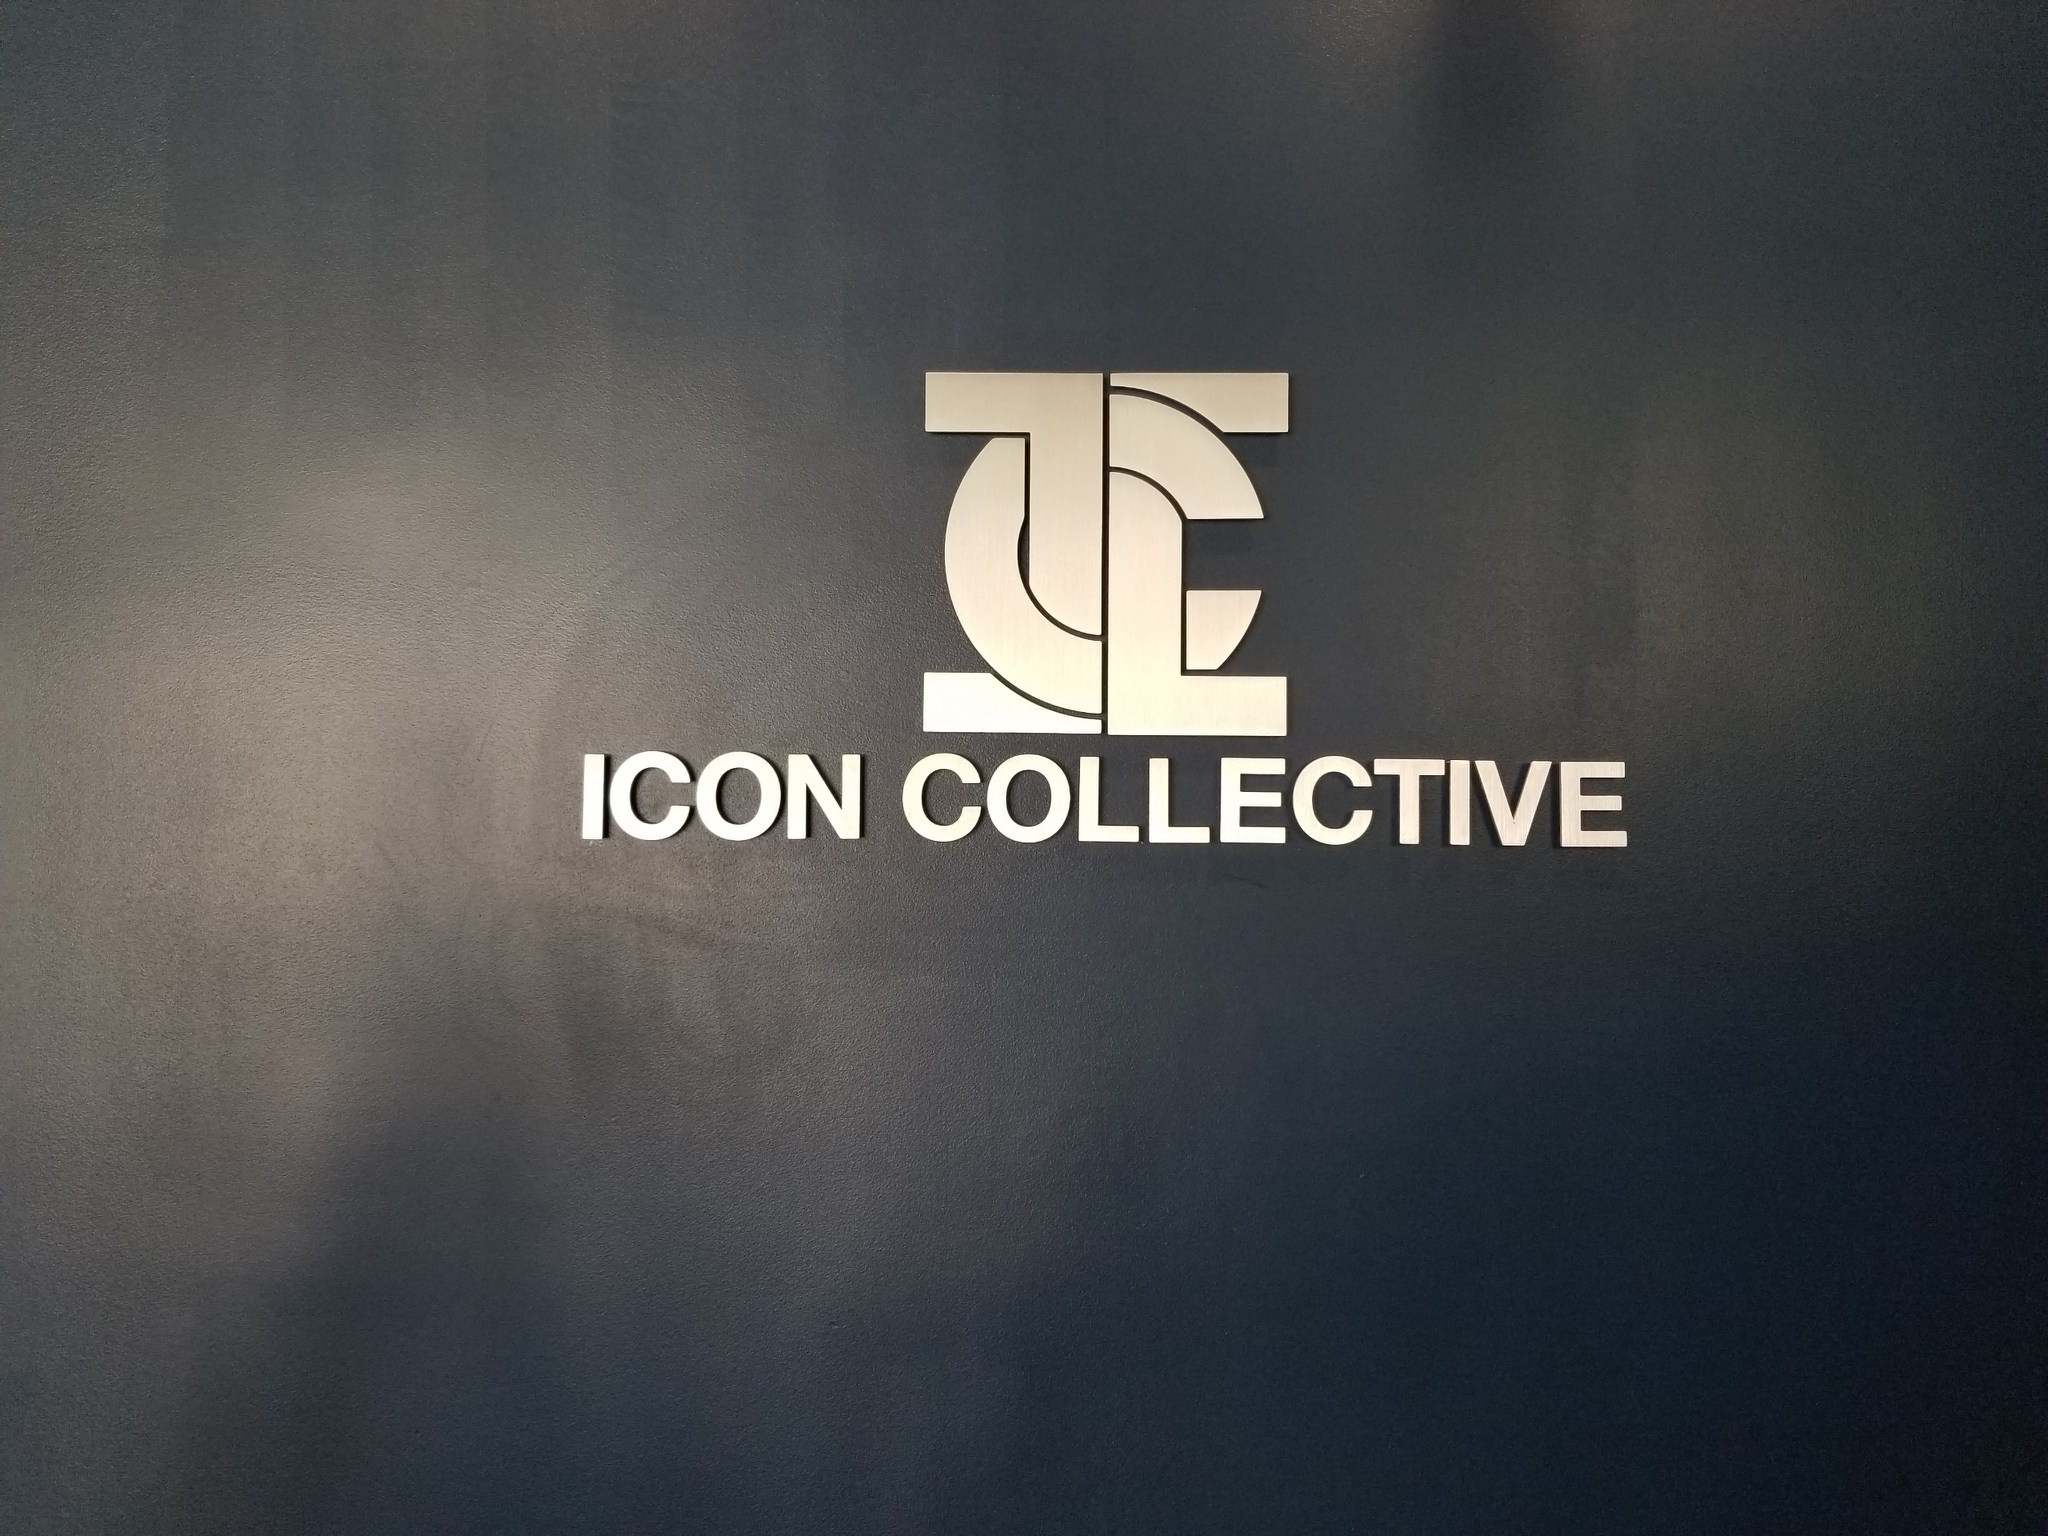 This is our metal school lobby sign for Icon Collective, part of a large outdoor and indoor business sign package we've created for the Burbank school.